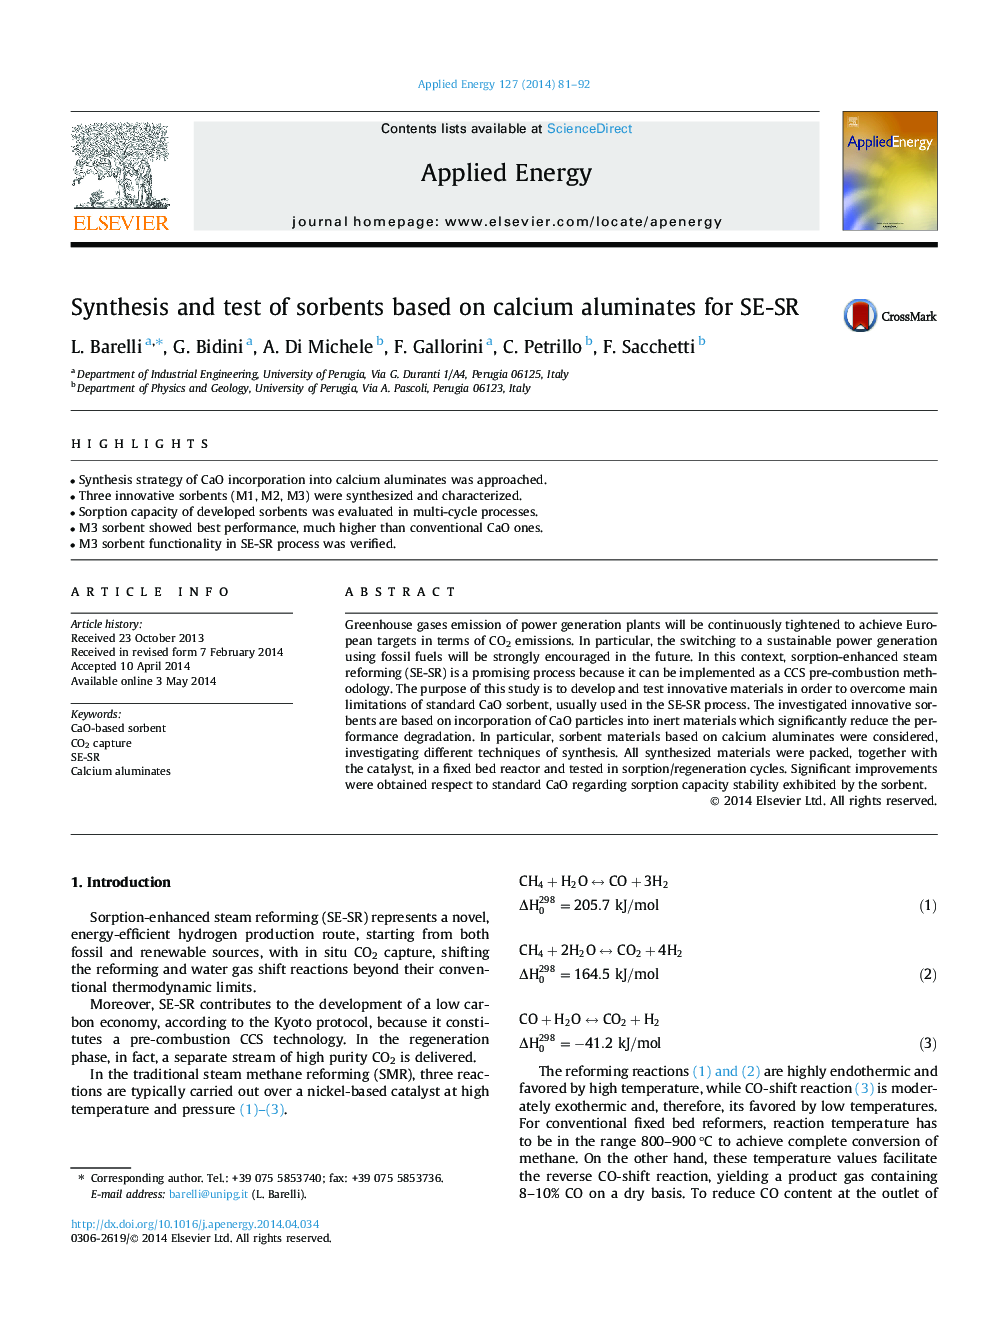 Synthesis and test of sorbents based on calcium aluminates for SE-SR